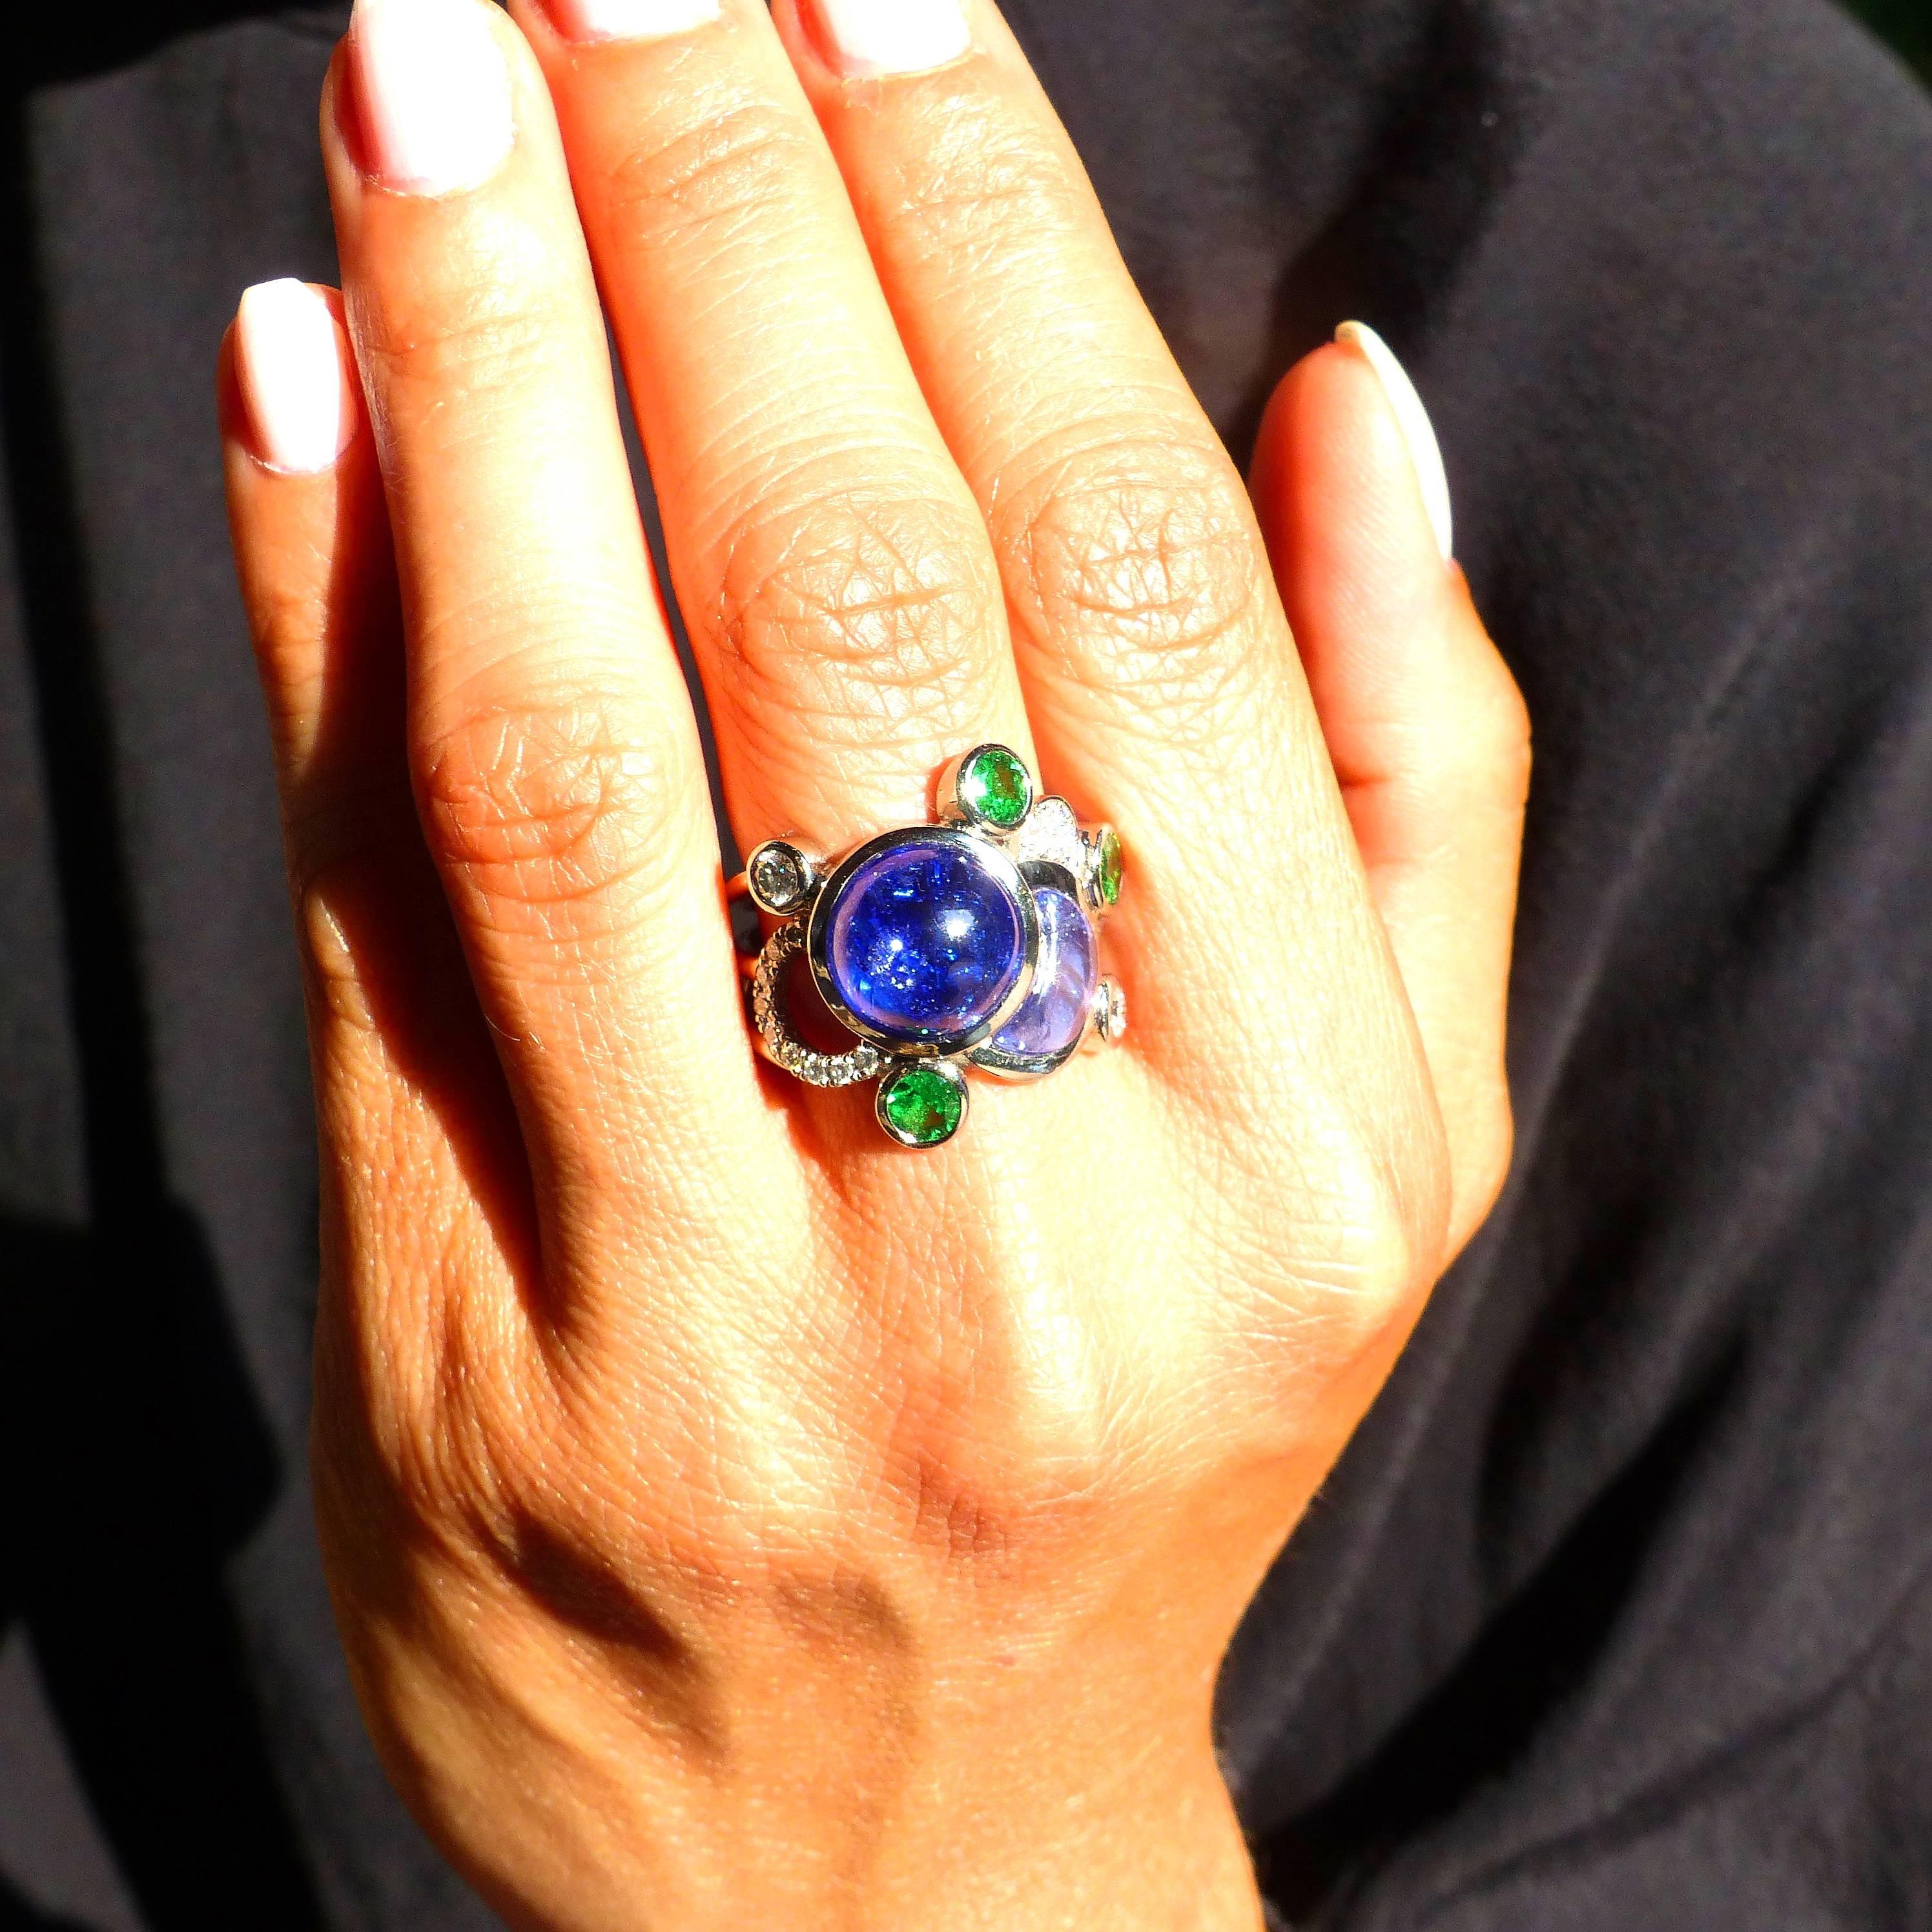 Radiant Cut Ring in White Gold with Tanzanites and Tsavorites and Diamonds. For Sale